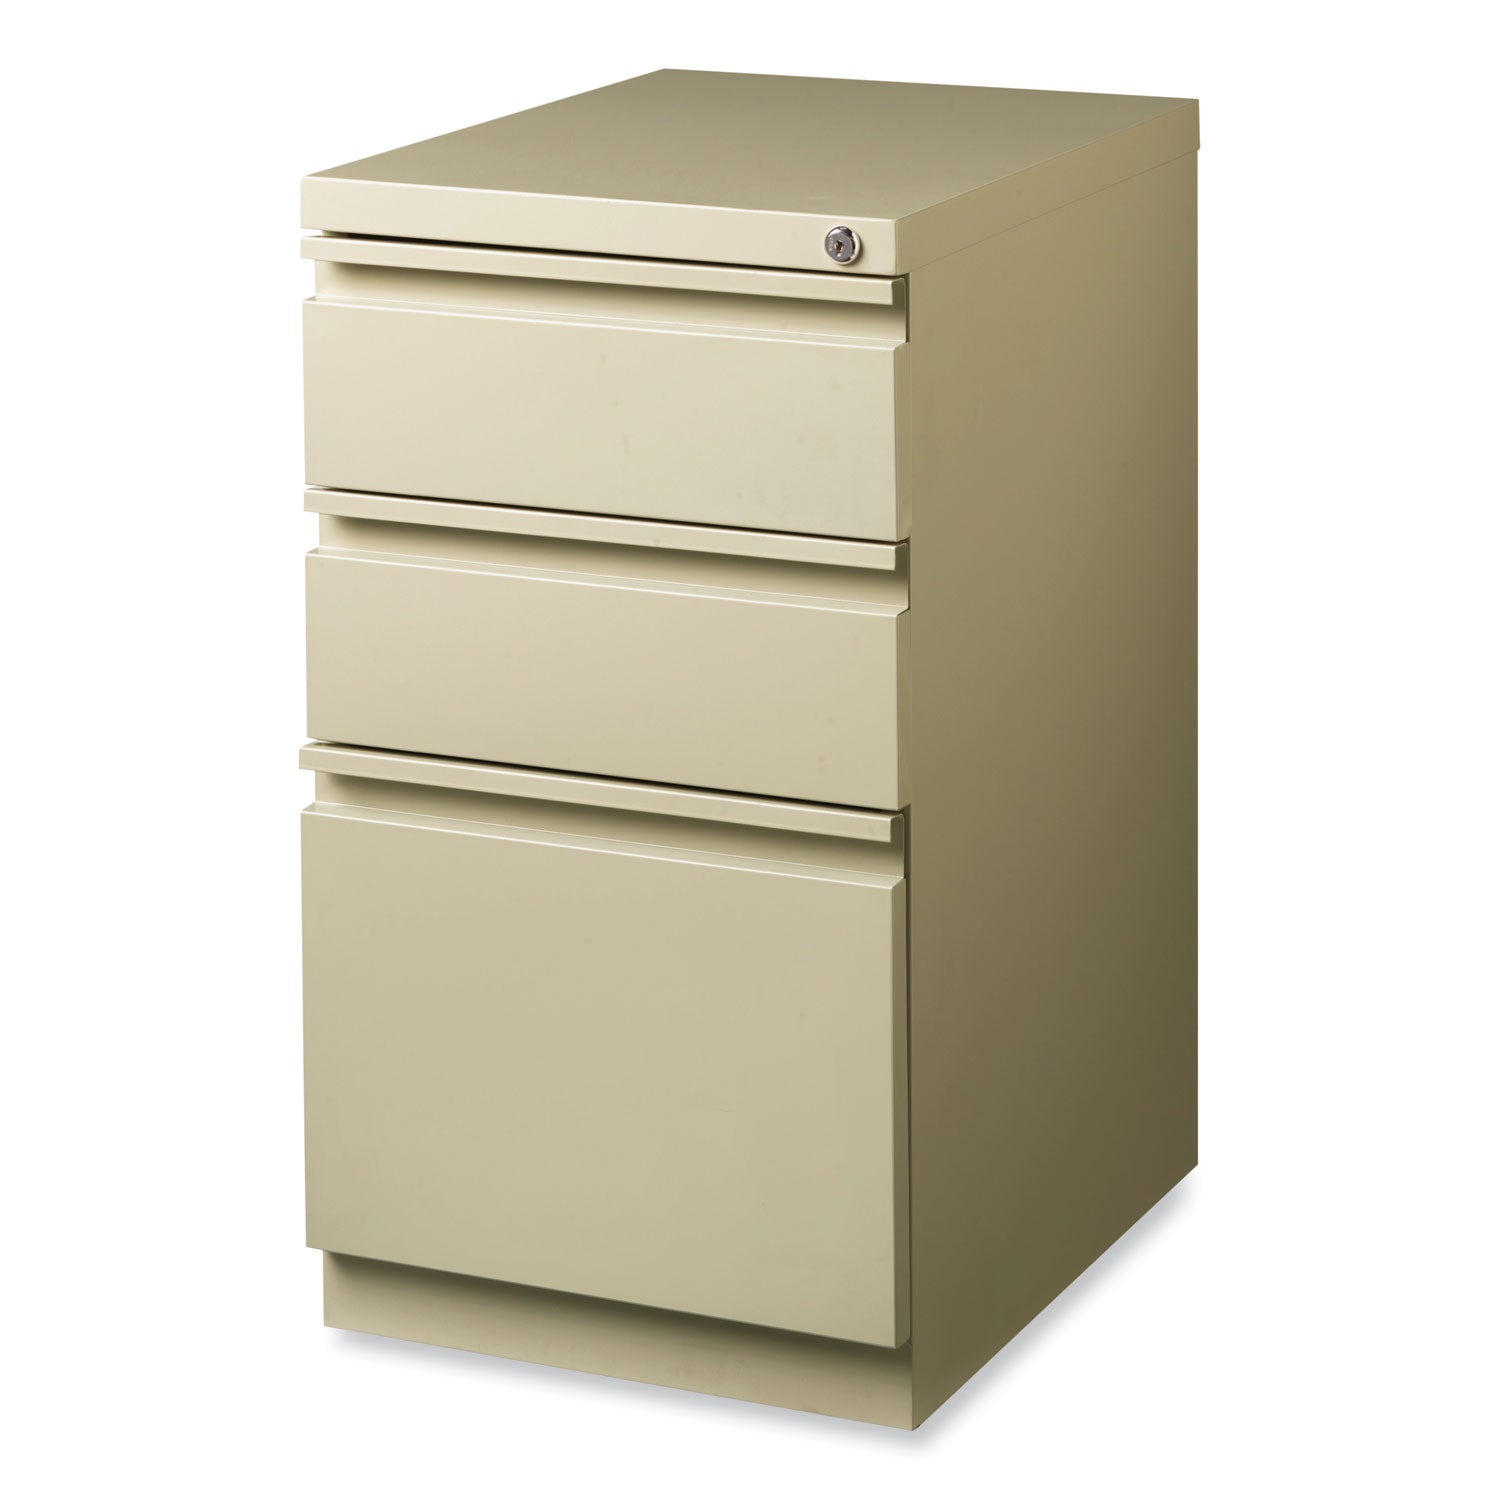 full-width-pull-20-deep-mobile-pedestal-file-box-box-file-letter-putty-15-x-1988-x-2775-ships-in-4-6-business-days_hid18574 - 2